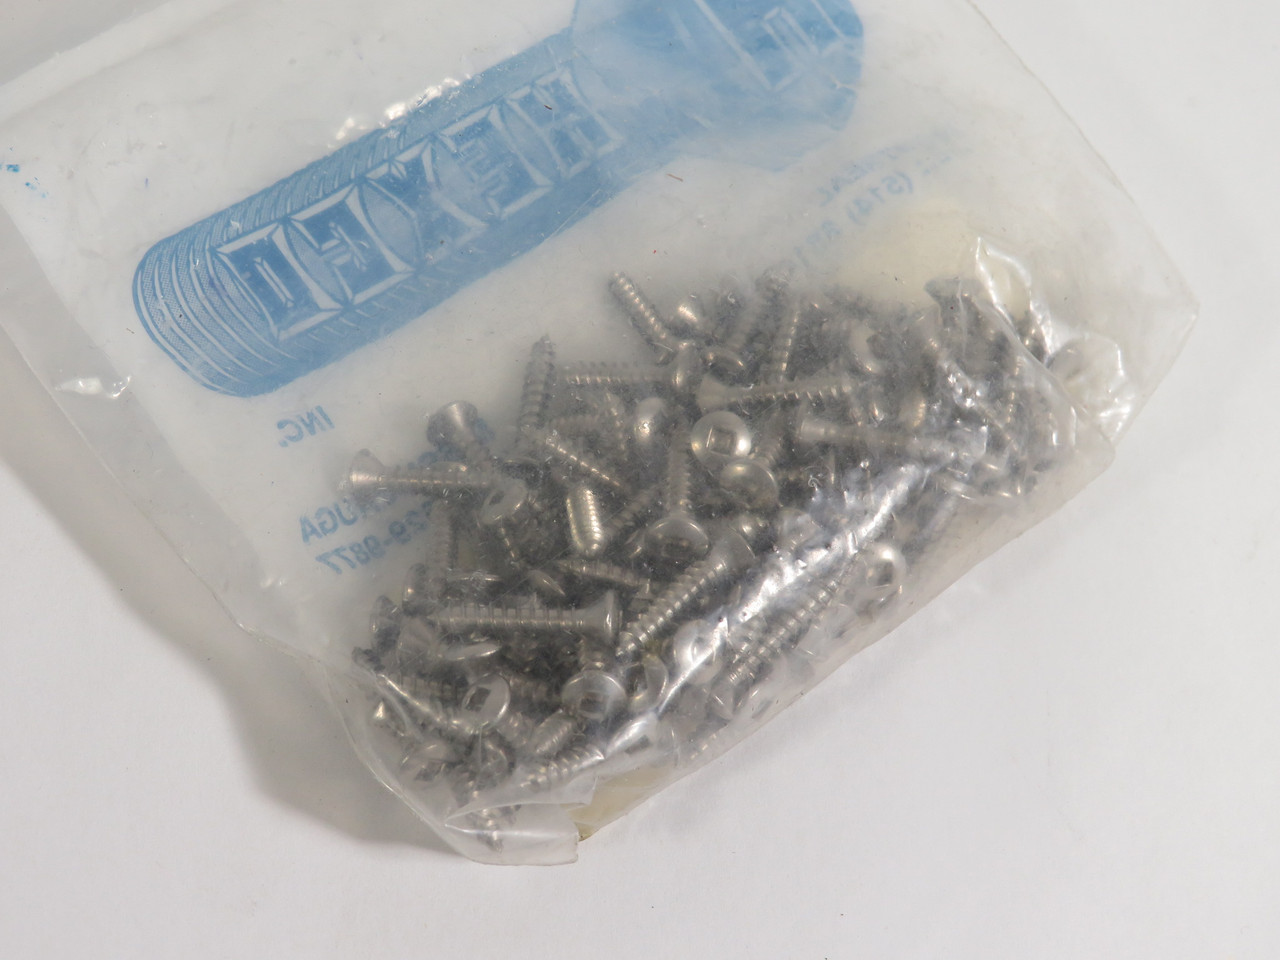 Hexco Oval Square Screw 6 X 3/4" 100-Pack NWB